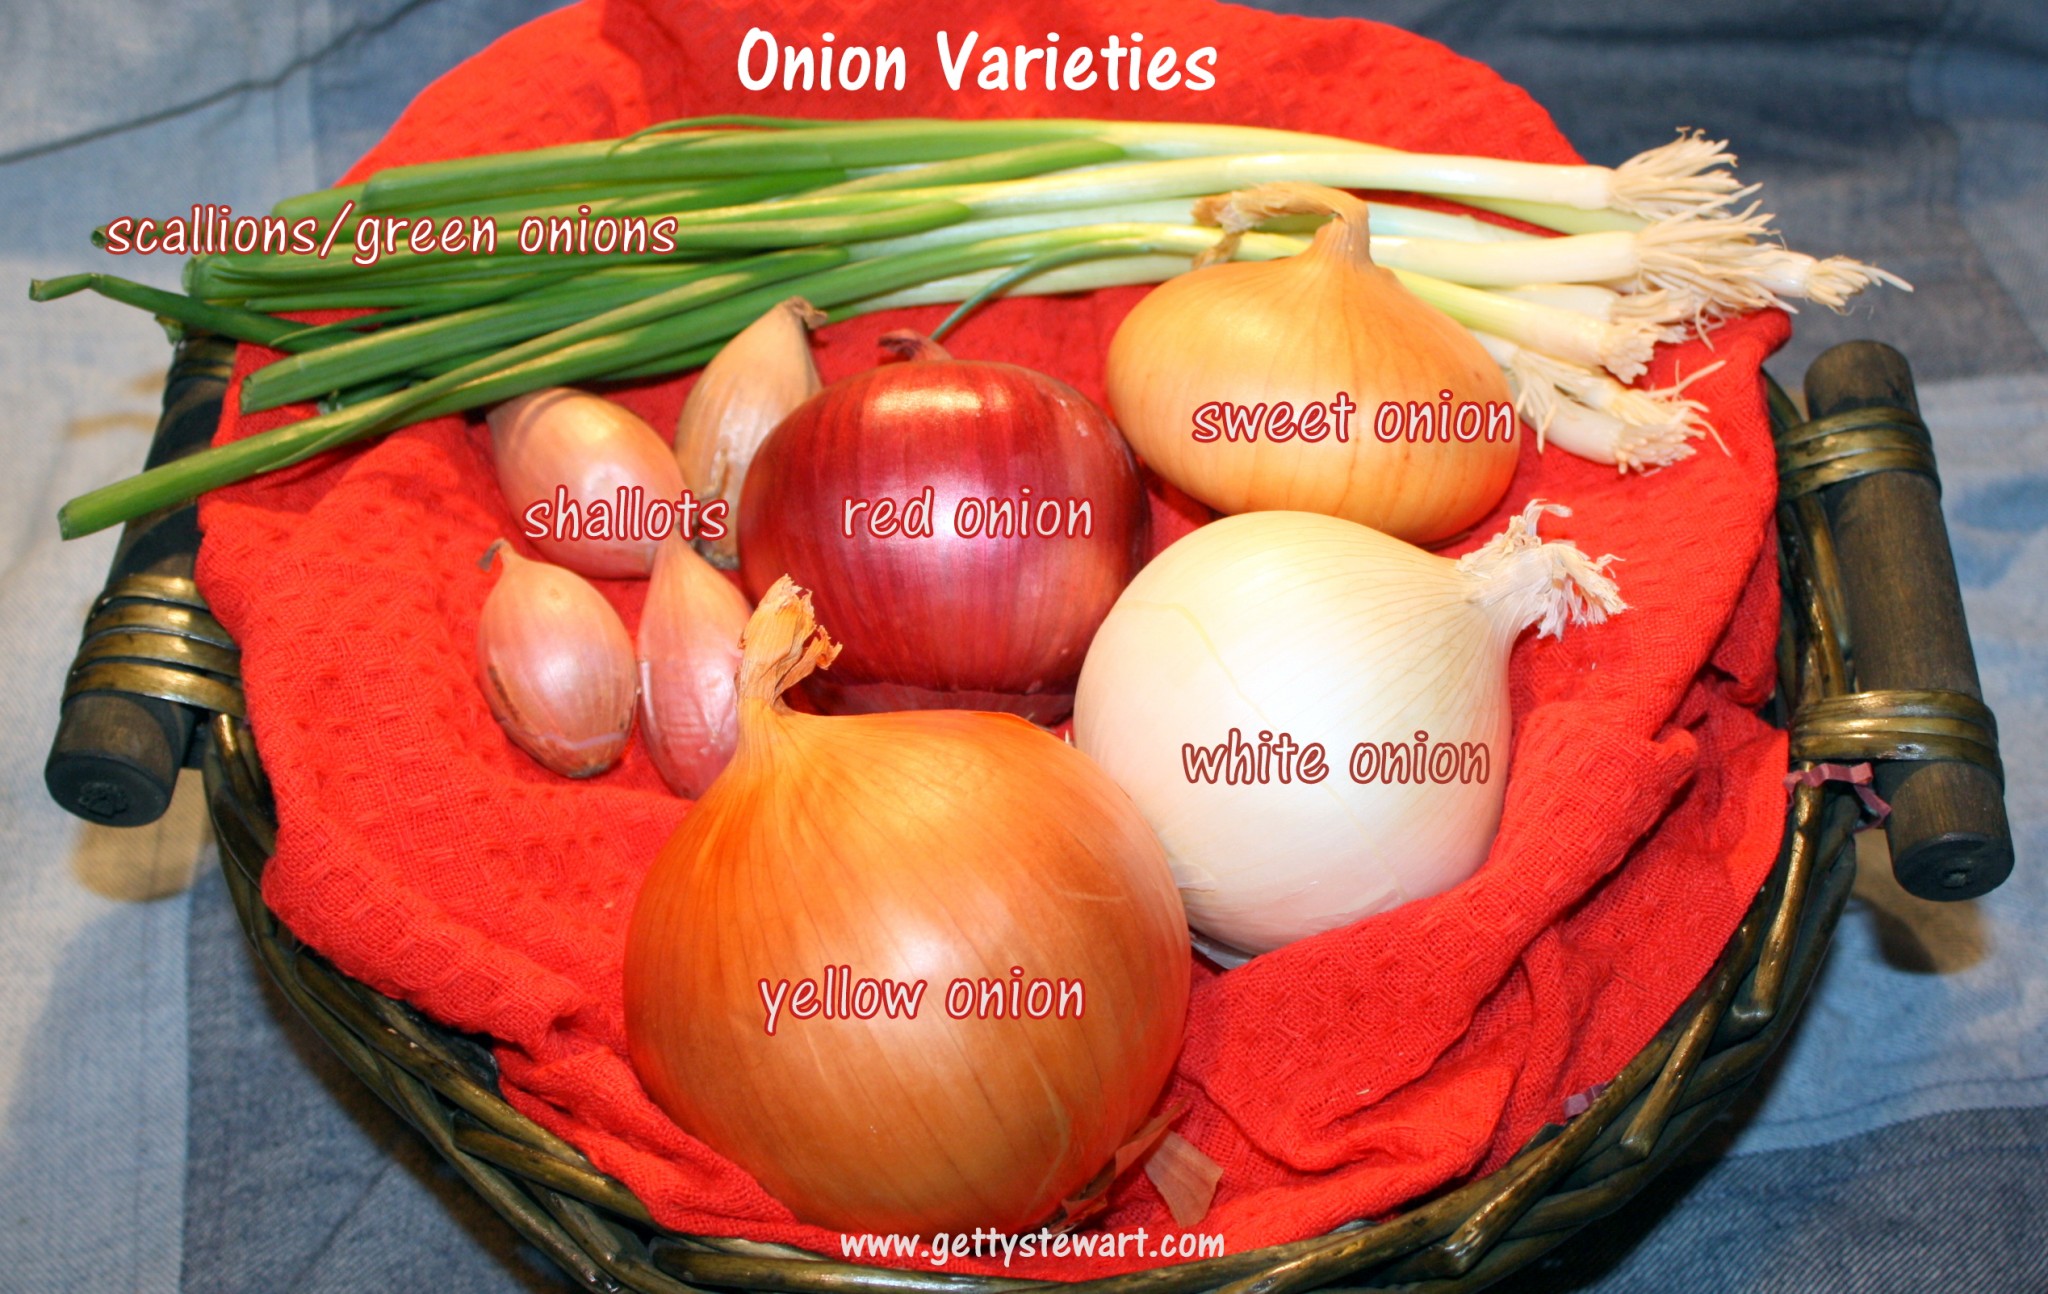 How to use onion sites